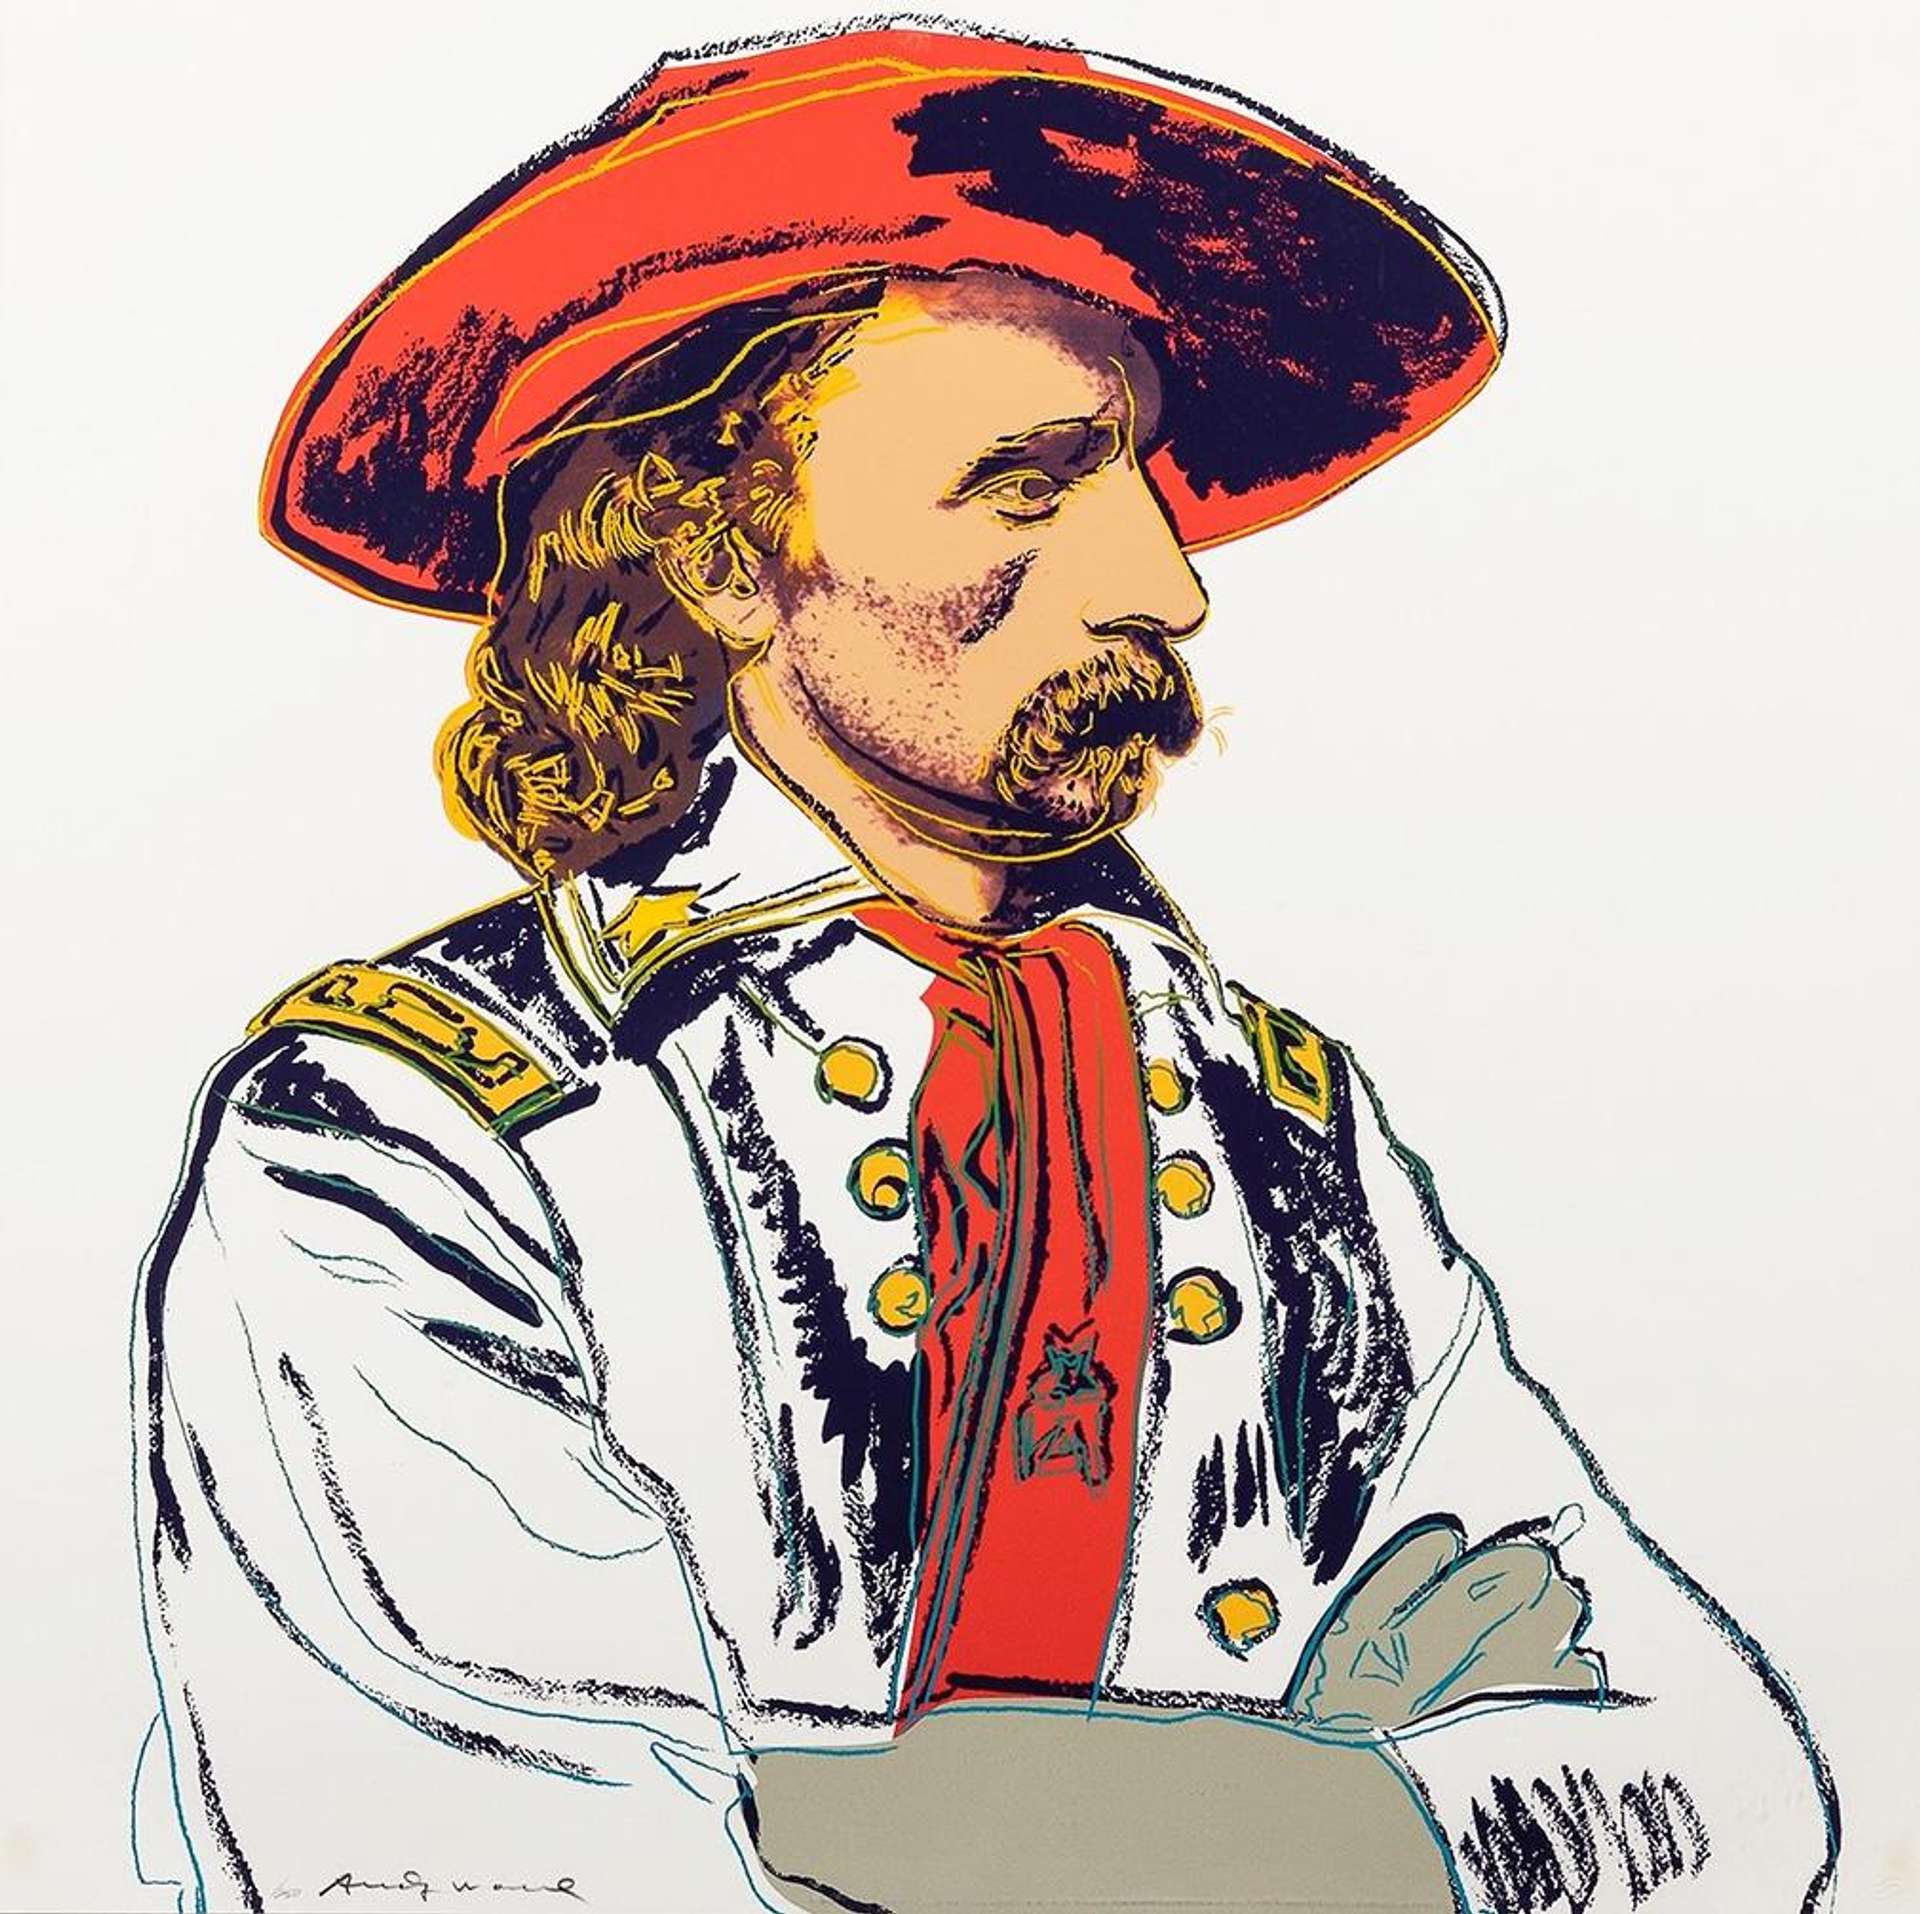 A screenprint by Andy Warhol depicting General Custer with a red hat and neck tie against a white background, looking out of the right side of the picture plane.